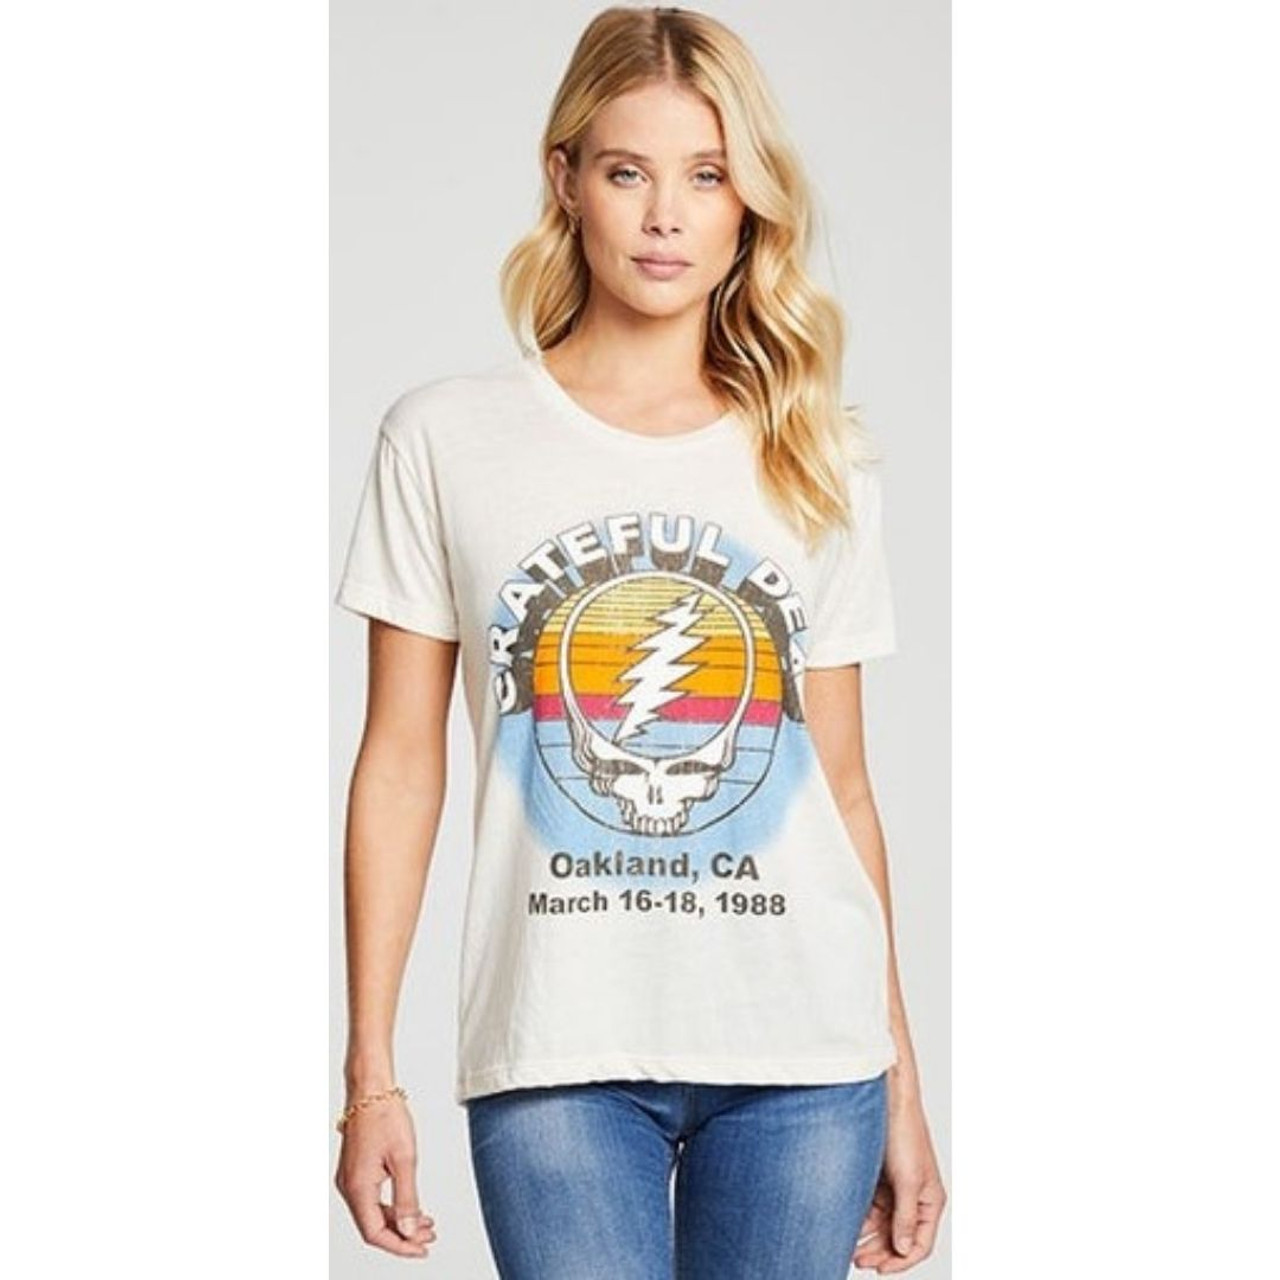 Grateful Dead Women's Vintage Concert T-Shirt by Chaser - March 16-18, 1988 Oakland, California. White Fashion Shirt